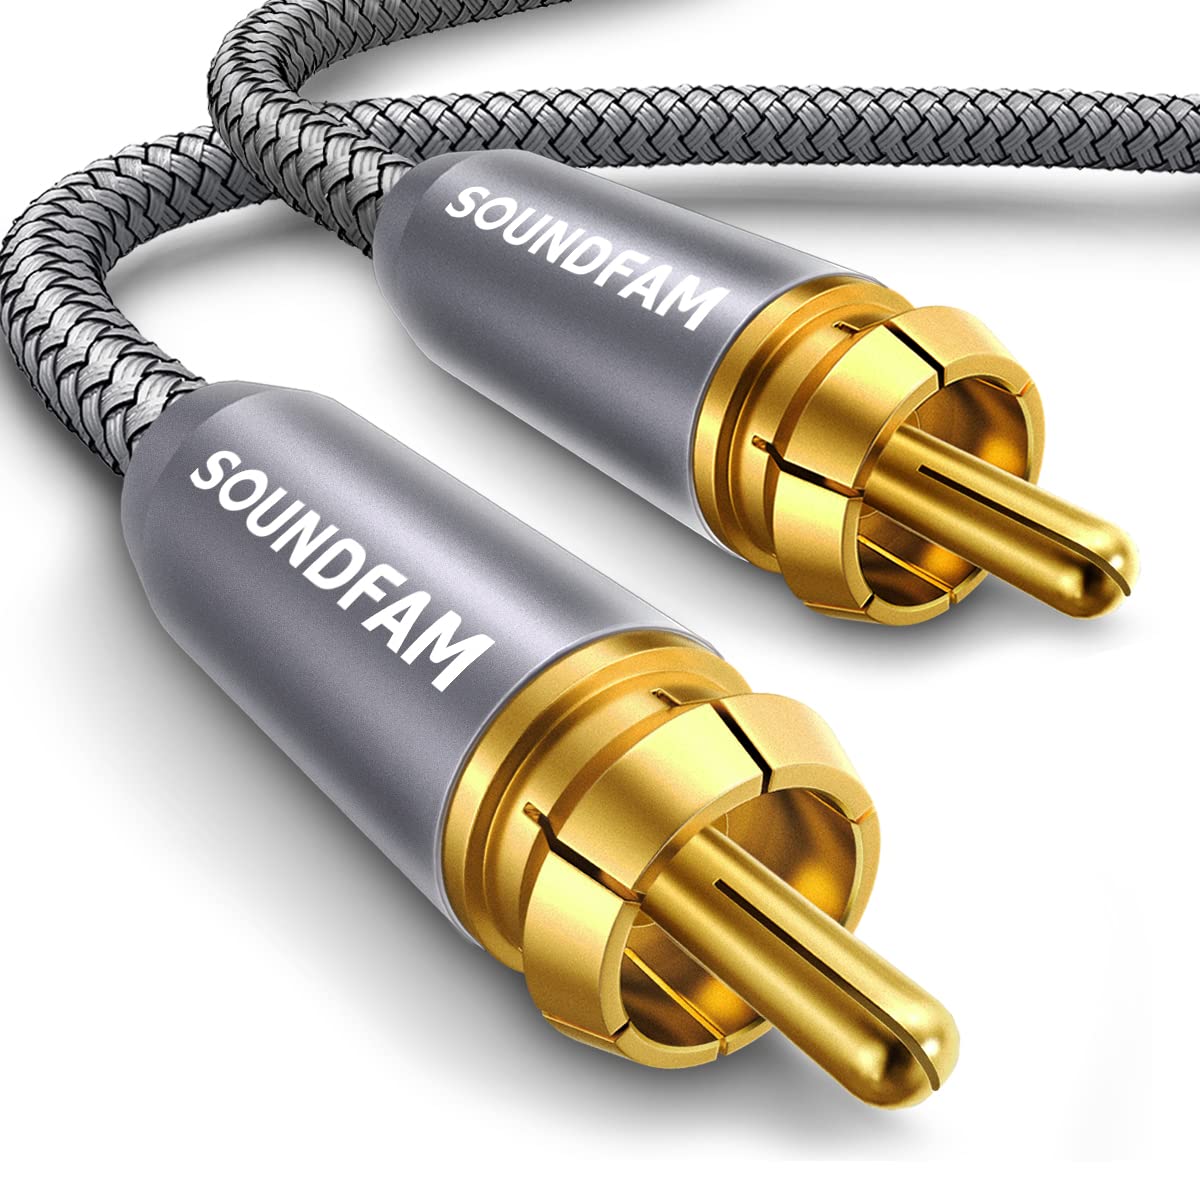 RCA Subwoofer Cable SOUNDFAM Digital Coaxial Audio Cable Gold Plated RCA Male to Male SPDIF Cable for Subwoofer,Home Theater,Amplifier,TV and More-Grey(3.3ft/1m)